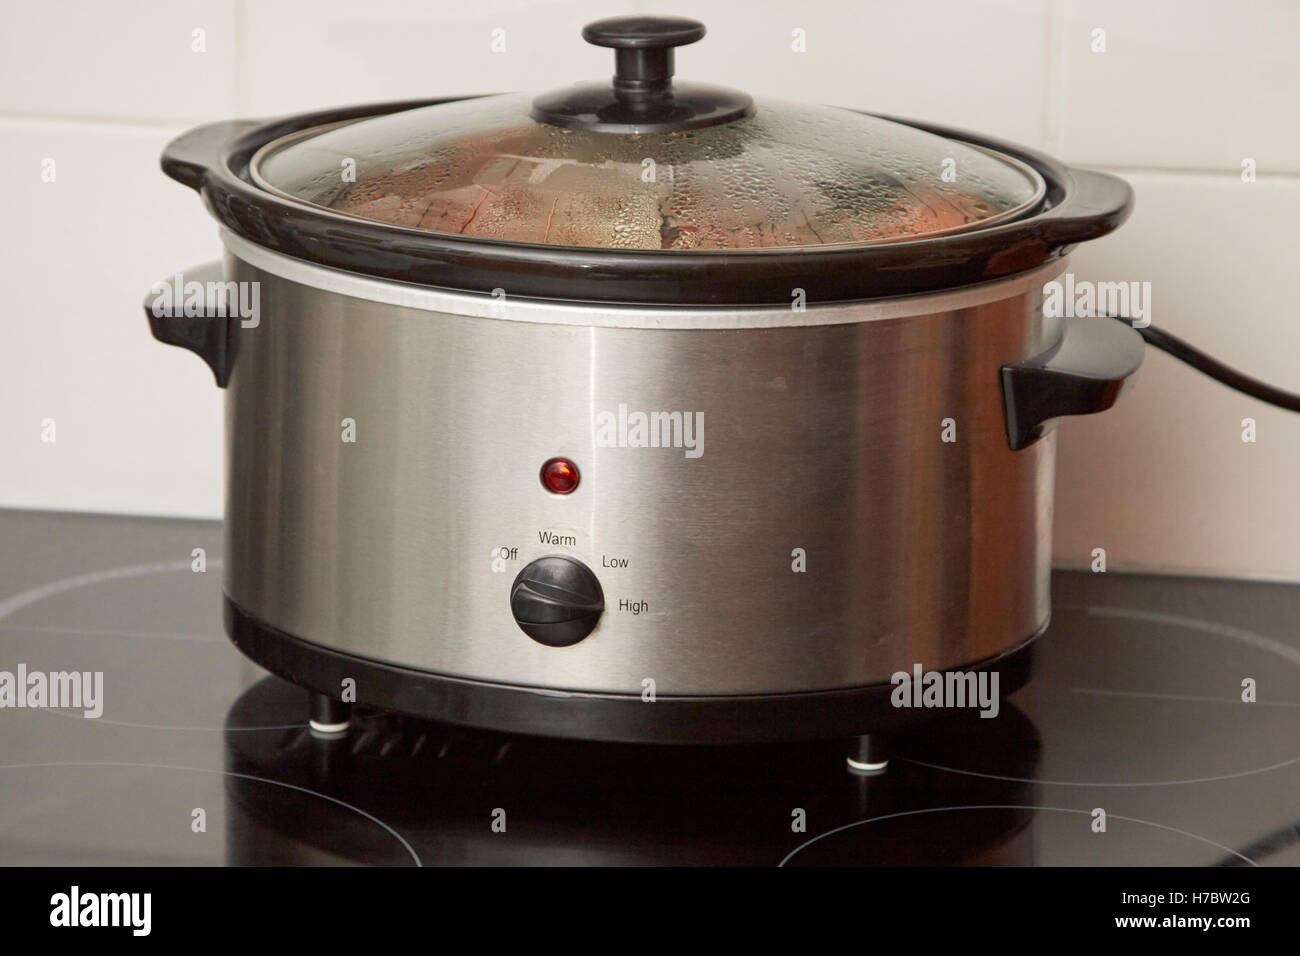 slow cooker cooking a casserole dish in a uk household Stock Photo